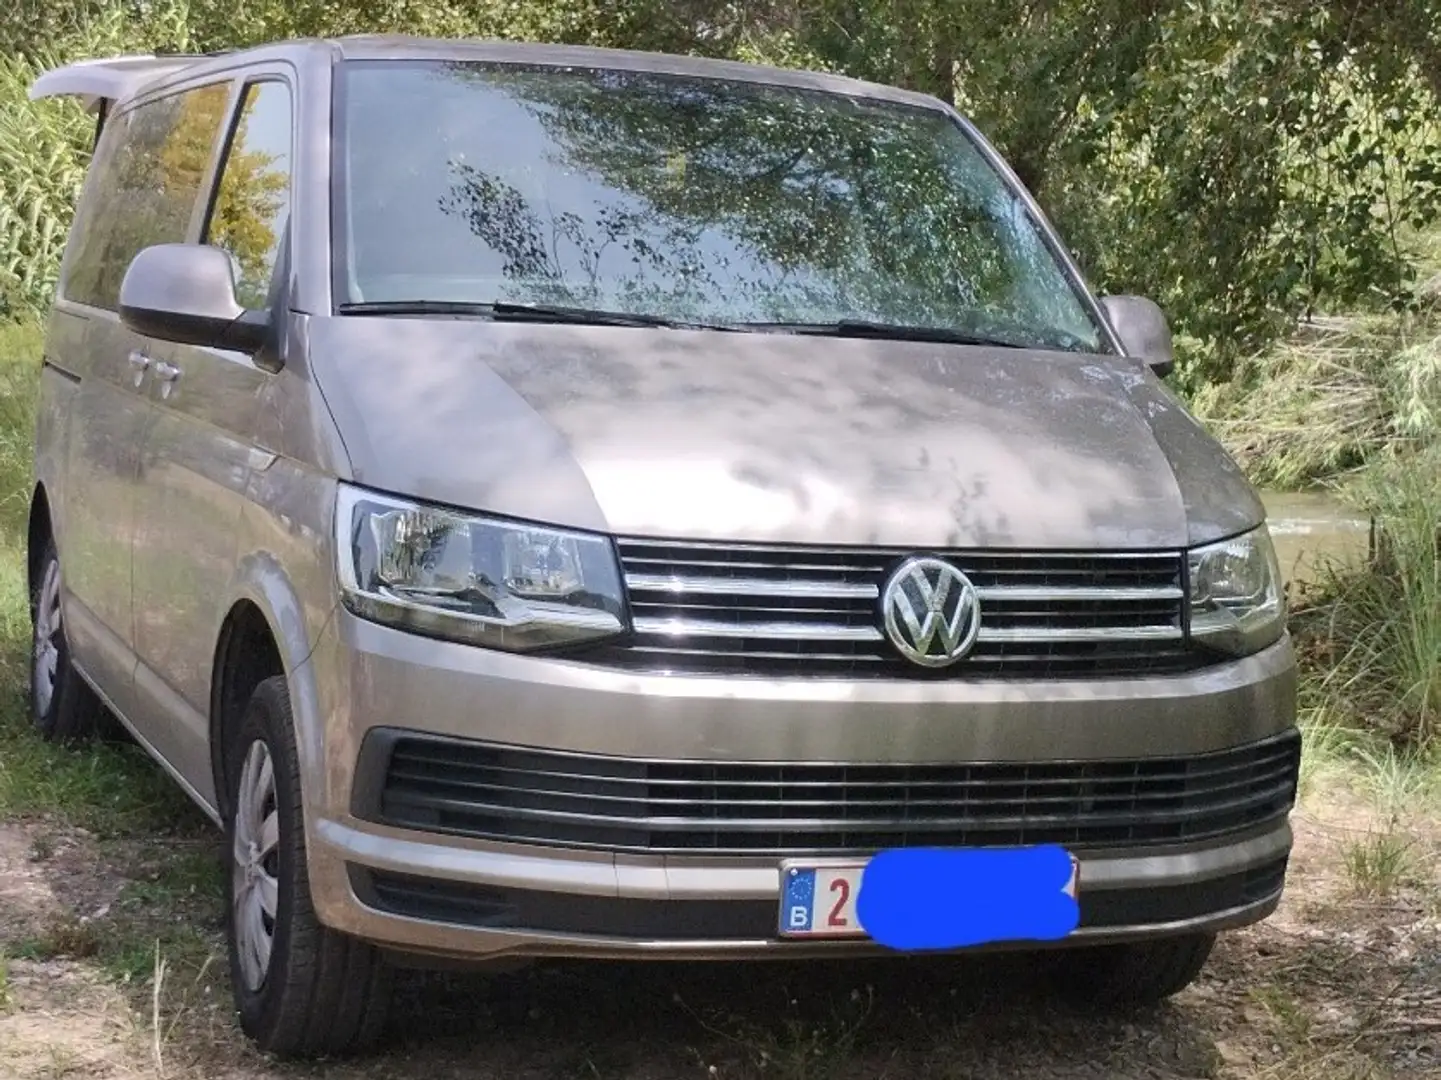 Volkswagen T6 Caravelle 2.0 TDI 102ch, 8 places,cuir,clim,gps,50000km Brons - 1